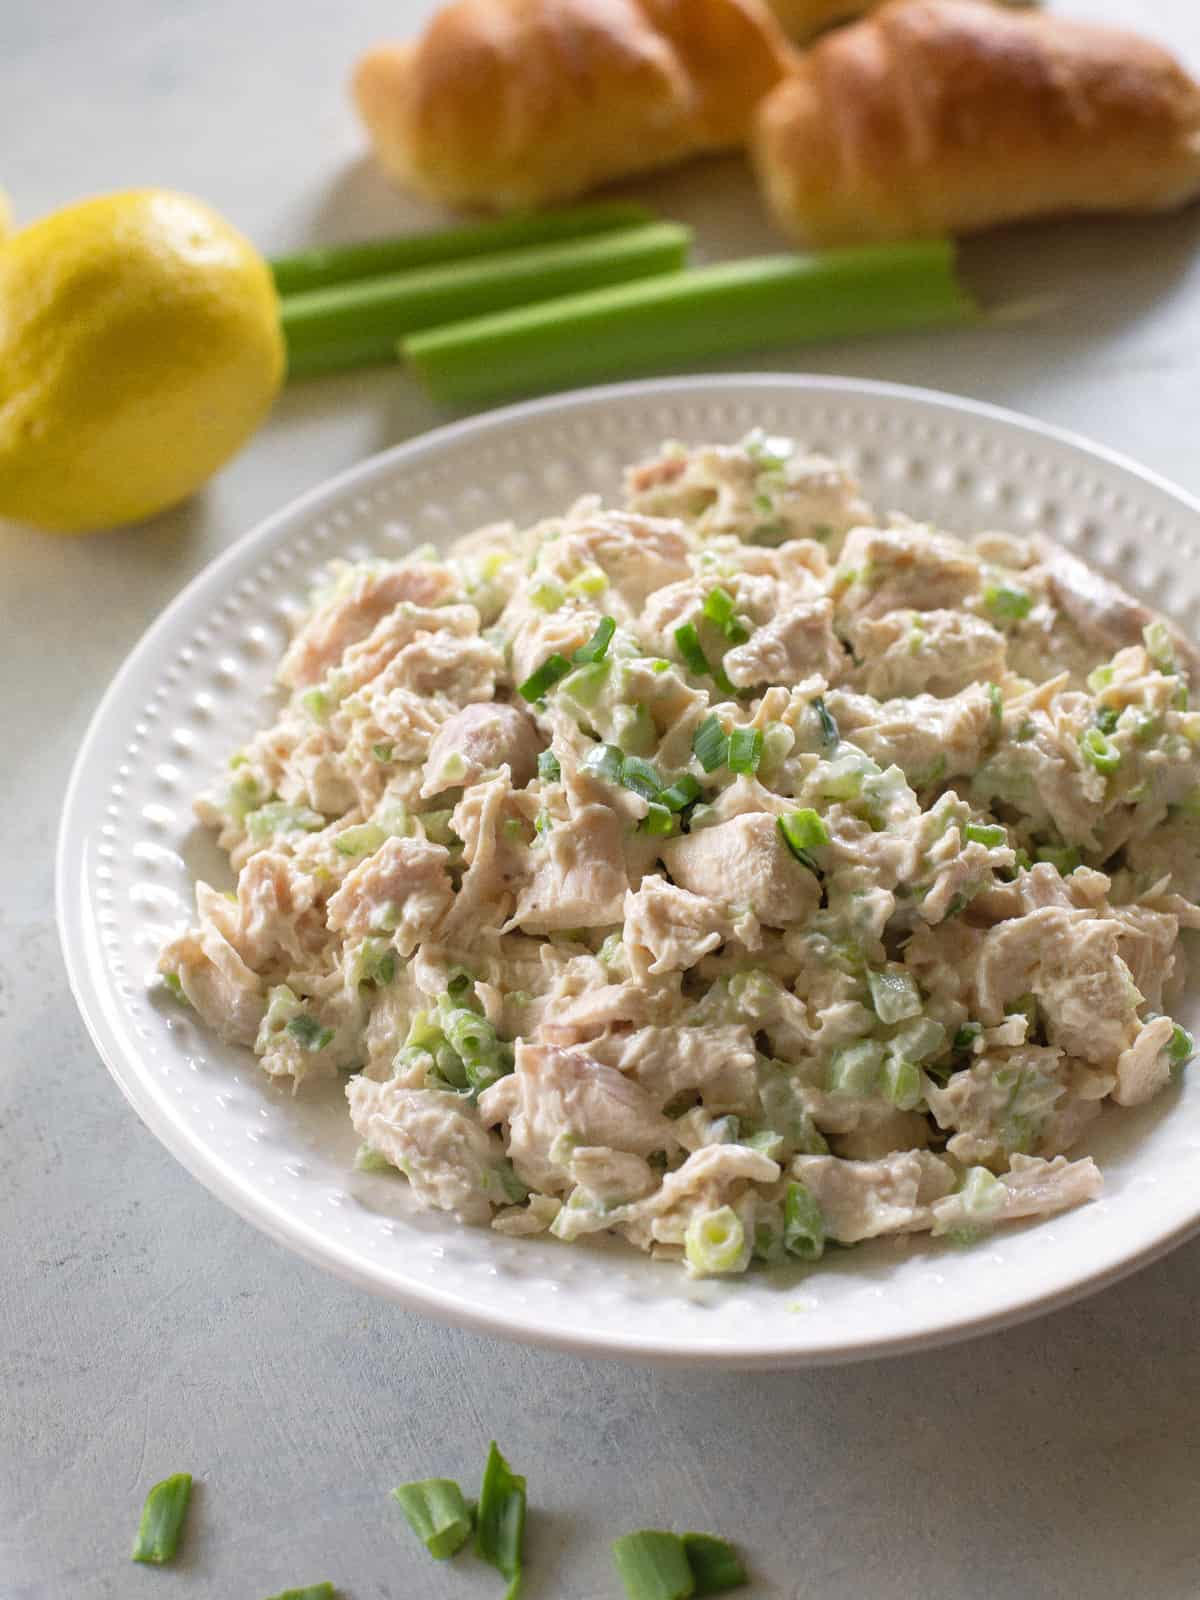 Chicken Salad Recipe - The Girl Who Ate Everything